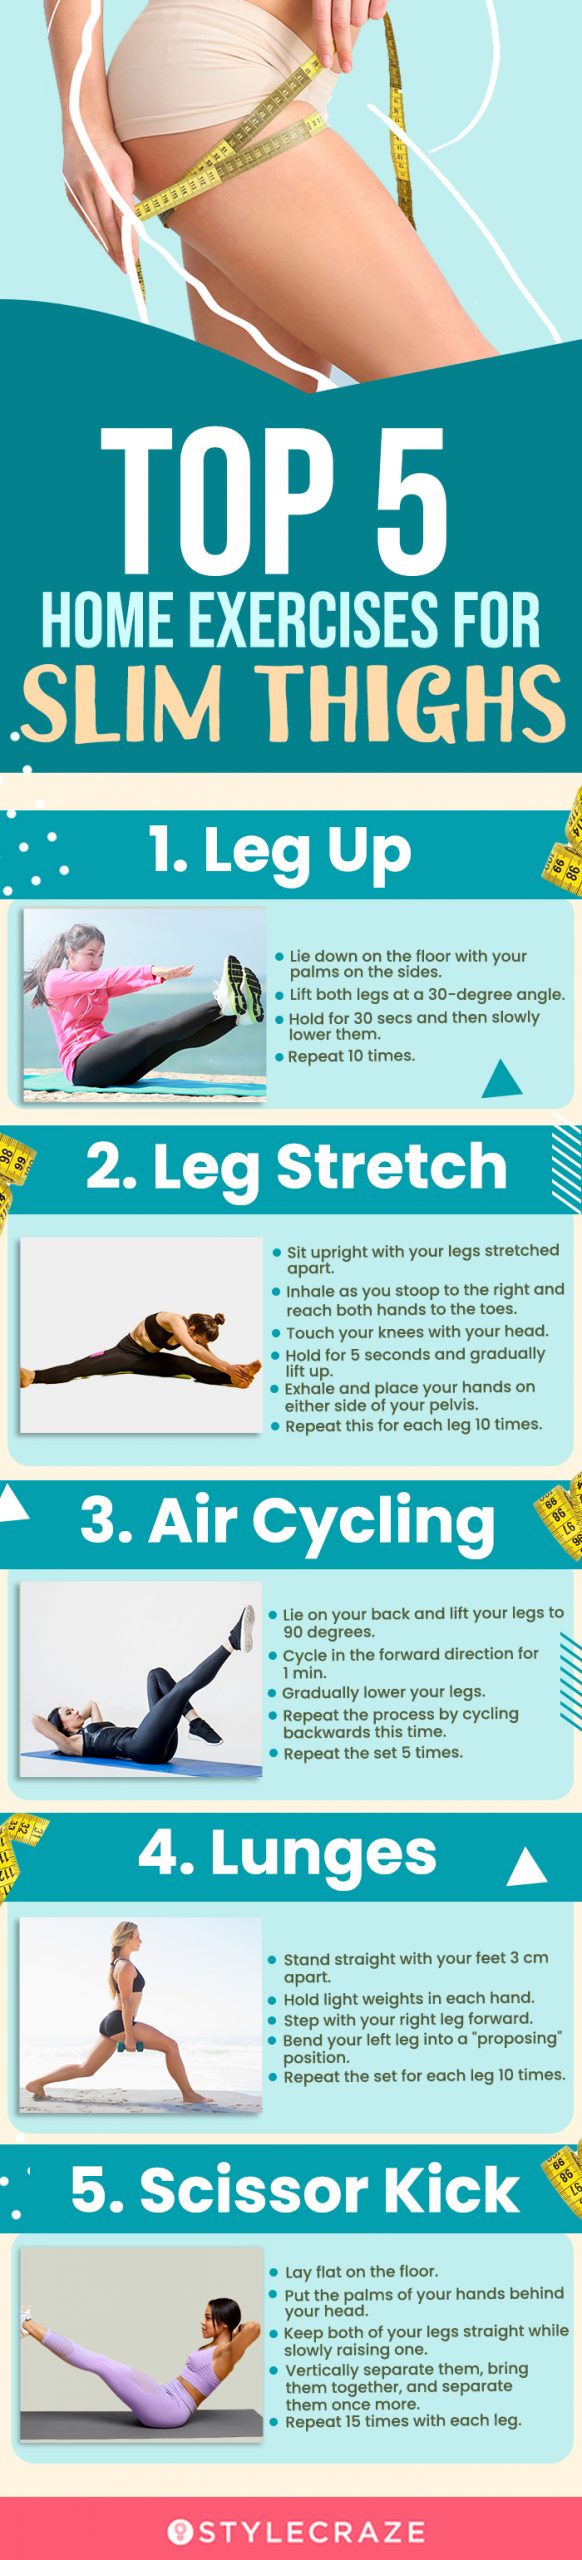 top 5 home exercises for slim thighs (infographic)